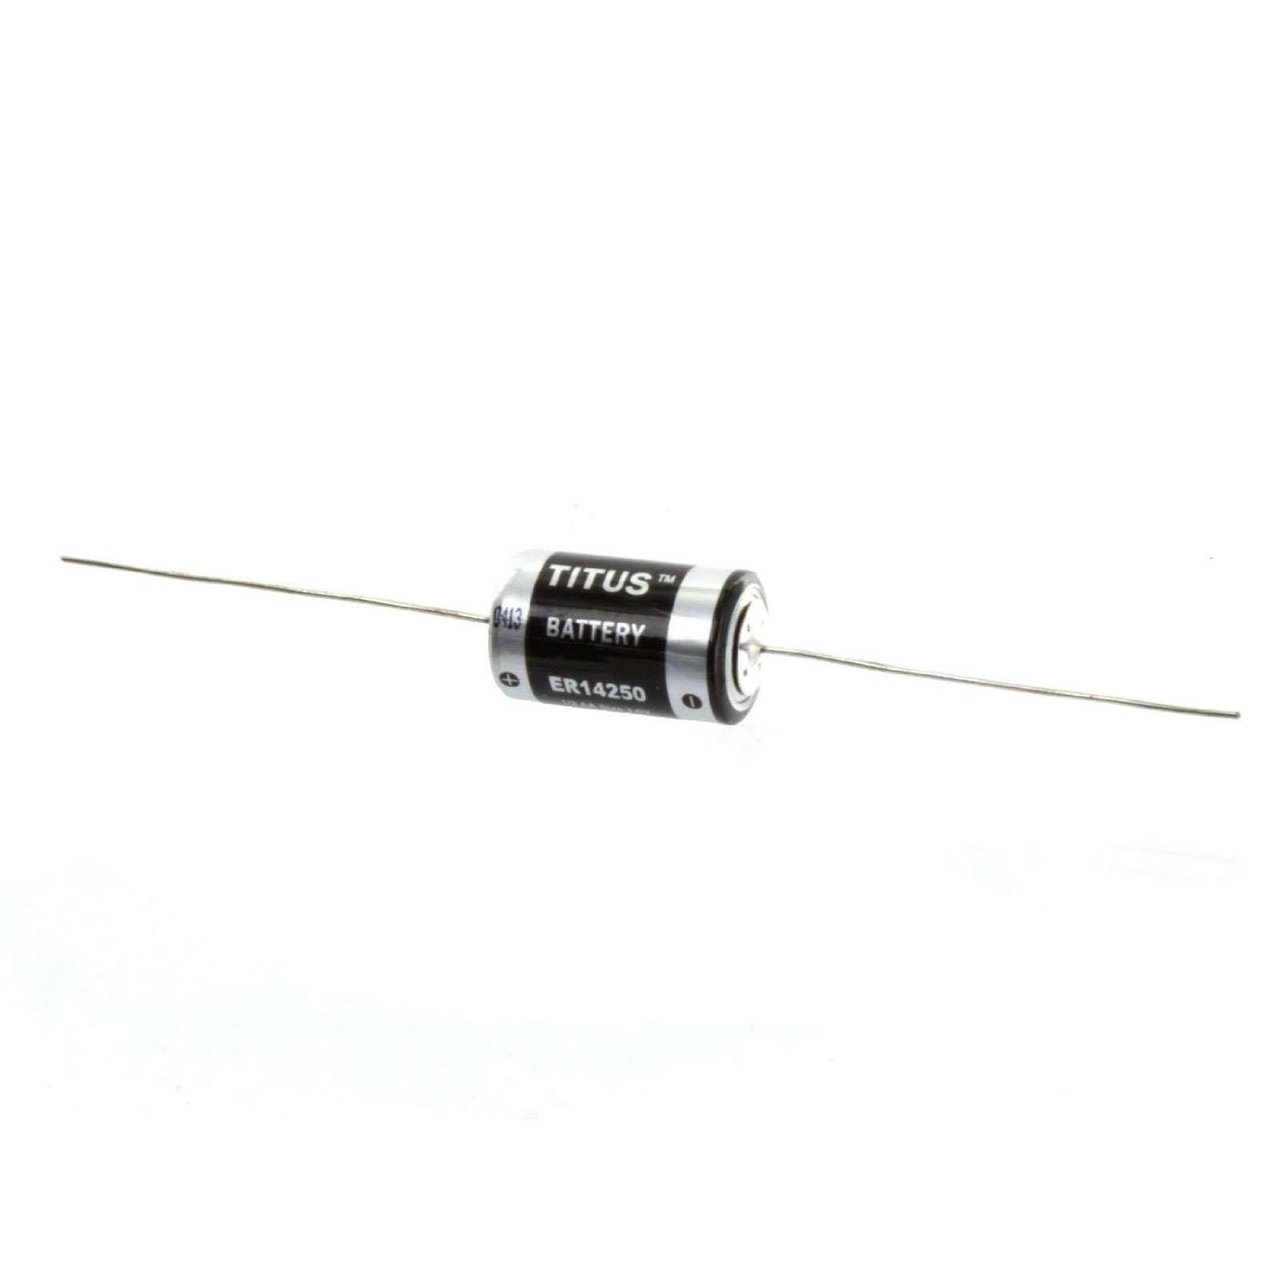 Titus 1/2 AA Size 3.6V ER14250FAX Lithium Battery With Axial Wire Leads - 1 Pack + Free Shipping!